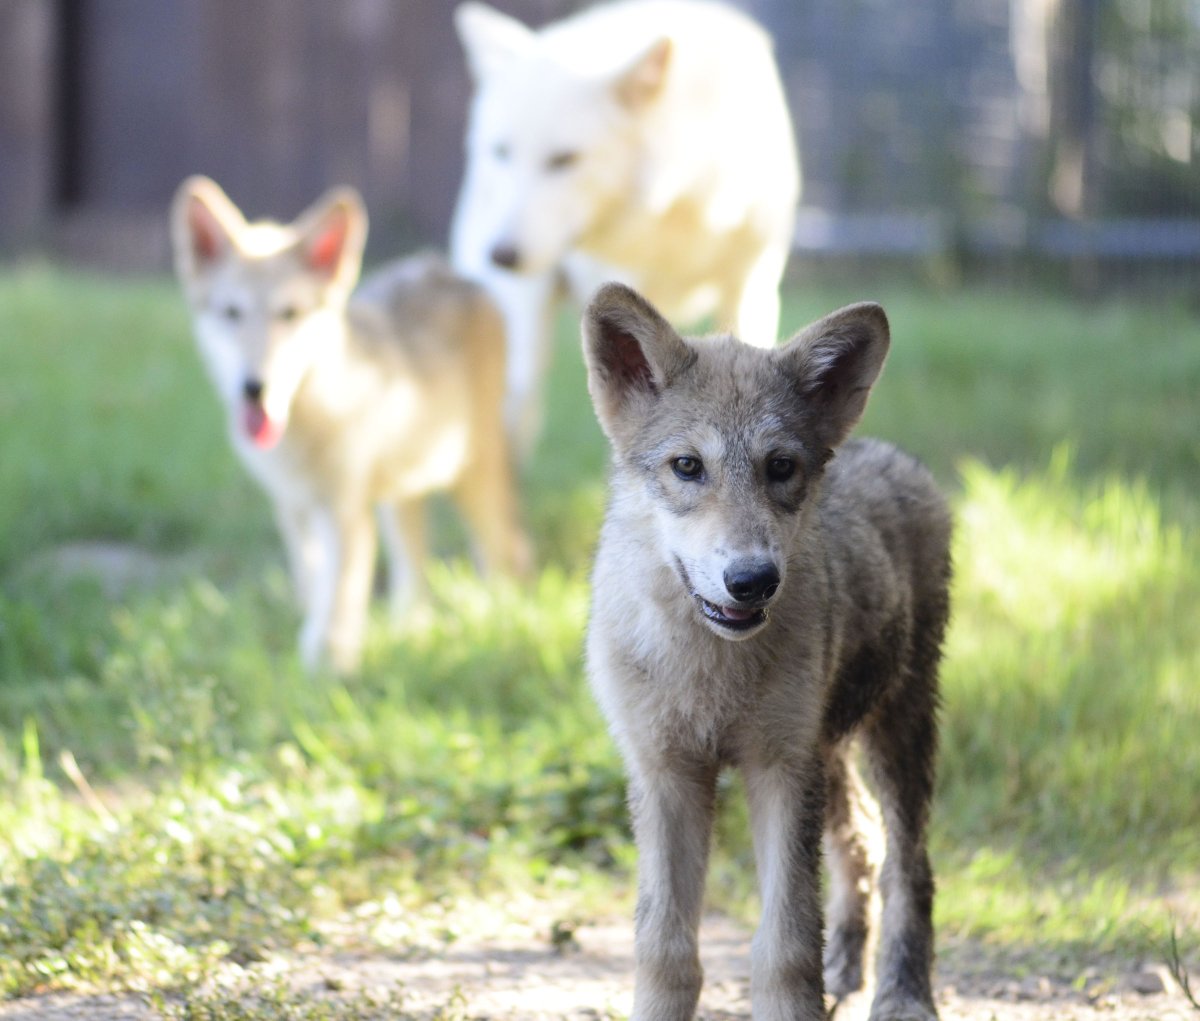 Animal World Snake Farm Zoo It S Nationalpuppyday Be Sure To Give Your Pups At Home Extra Love Today Awsfzoo Puppy Wolf Greywolf Wolvesofinstagram Austin Sanantonio Newbraunfels Texas Photooftheday Cuteanimals